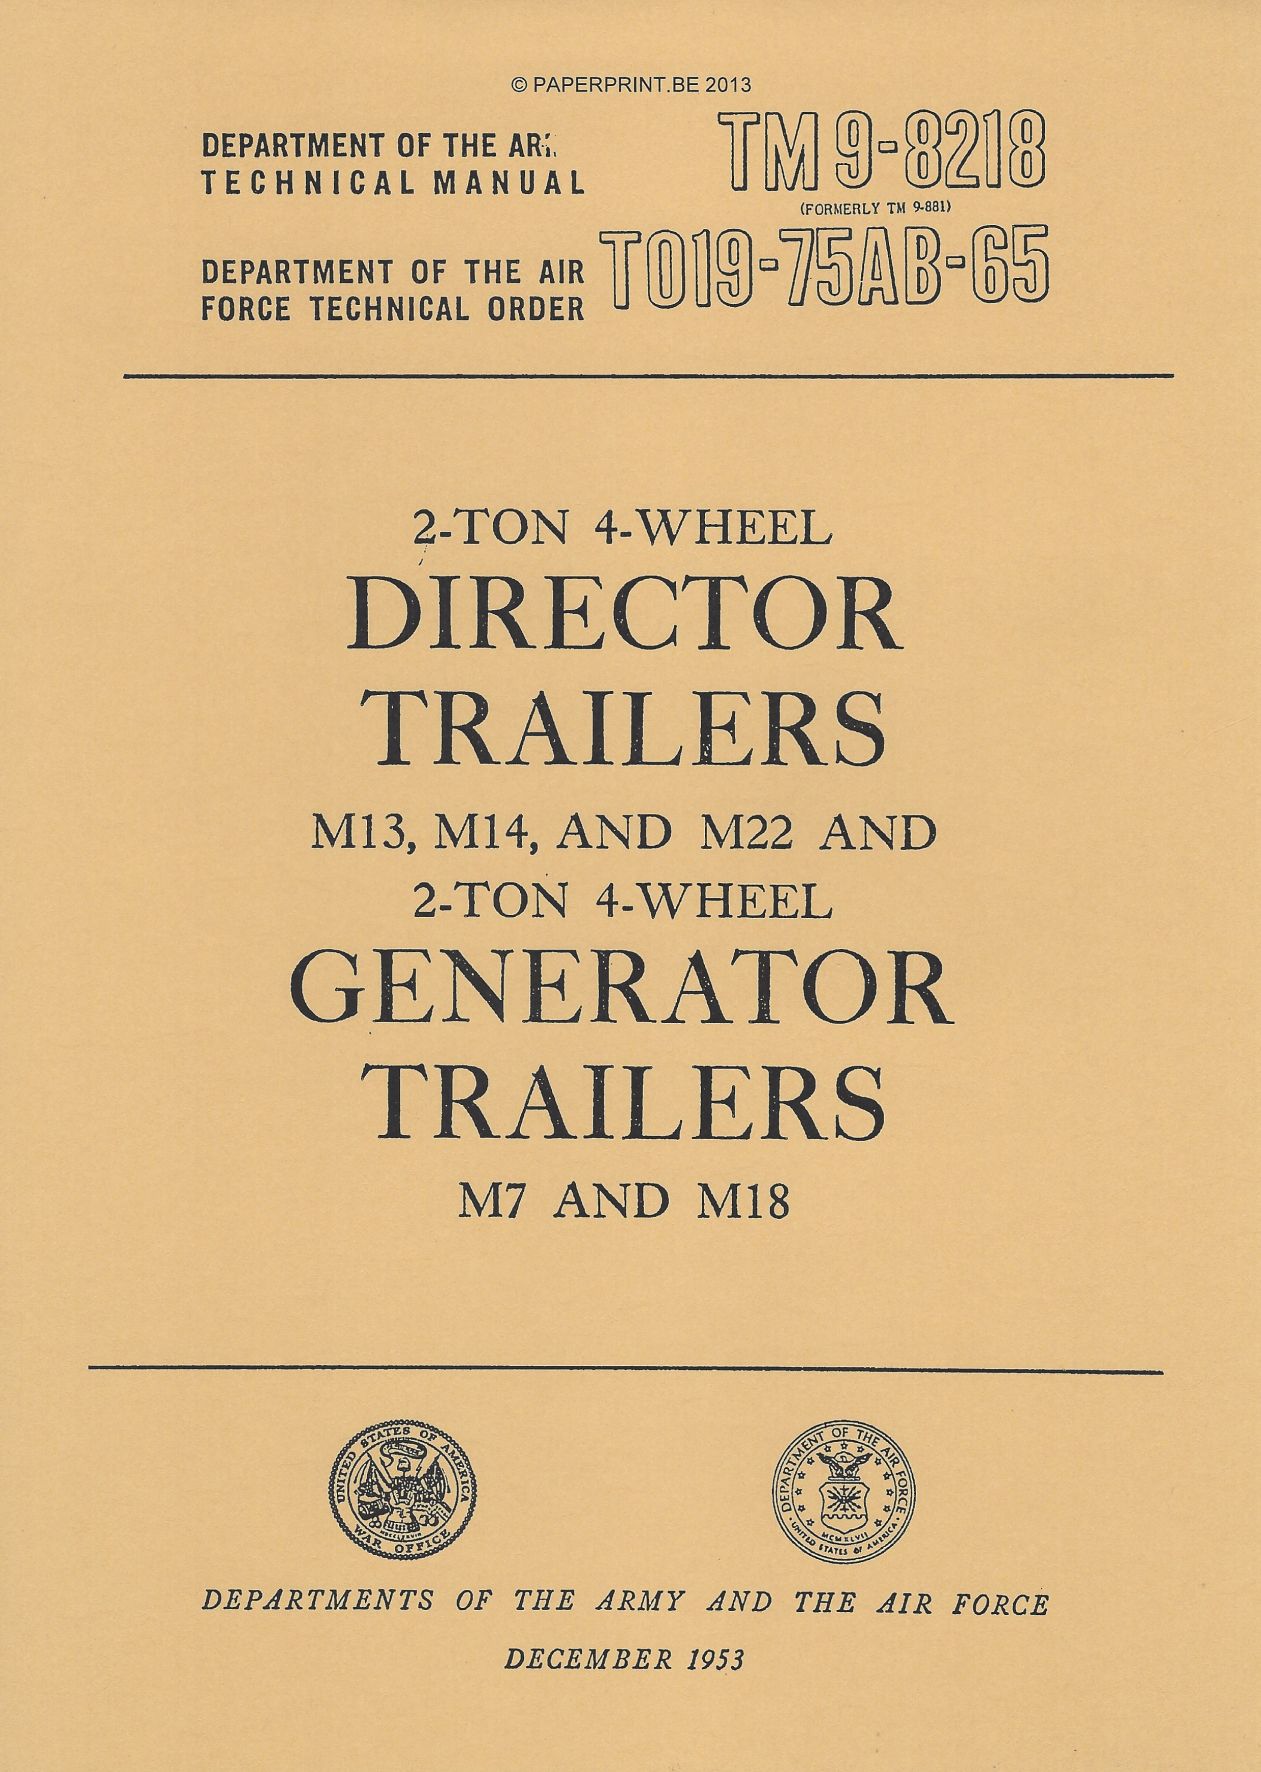 TM 9-8218 US 2-TON 4-WHEEL DIRECTOR TRAILERS M13, M14 AND M22 AND 2-TON 4-WHEEL GENERATOR  TRAILERS M7 AND M18